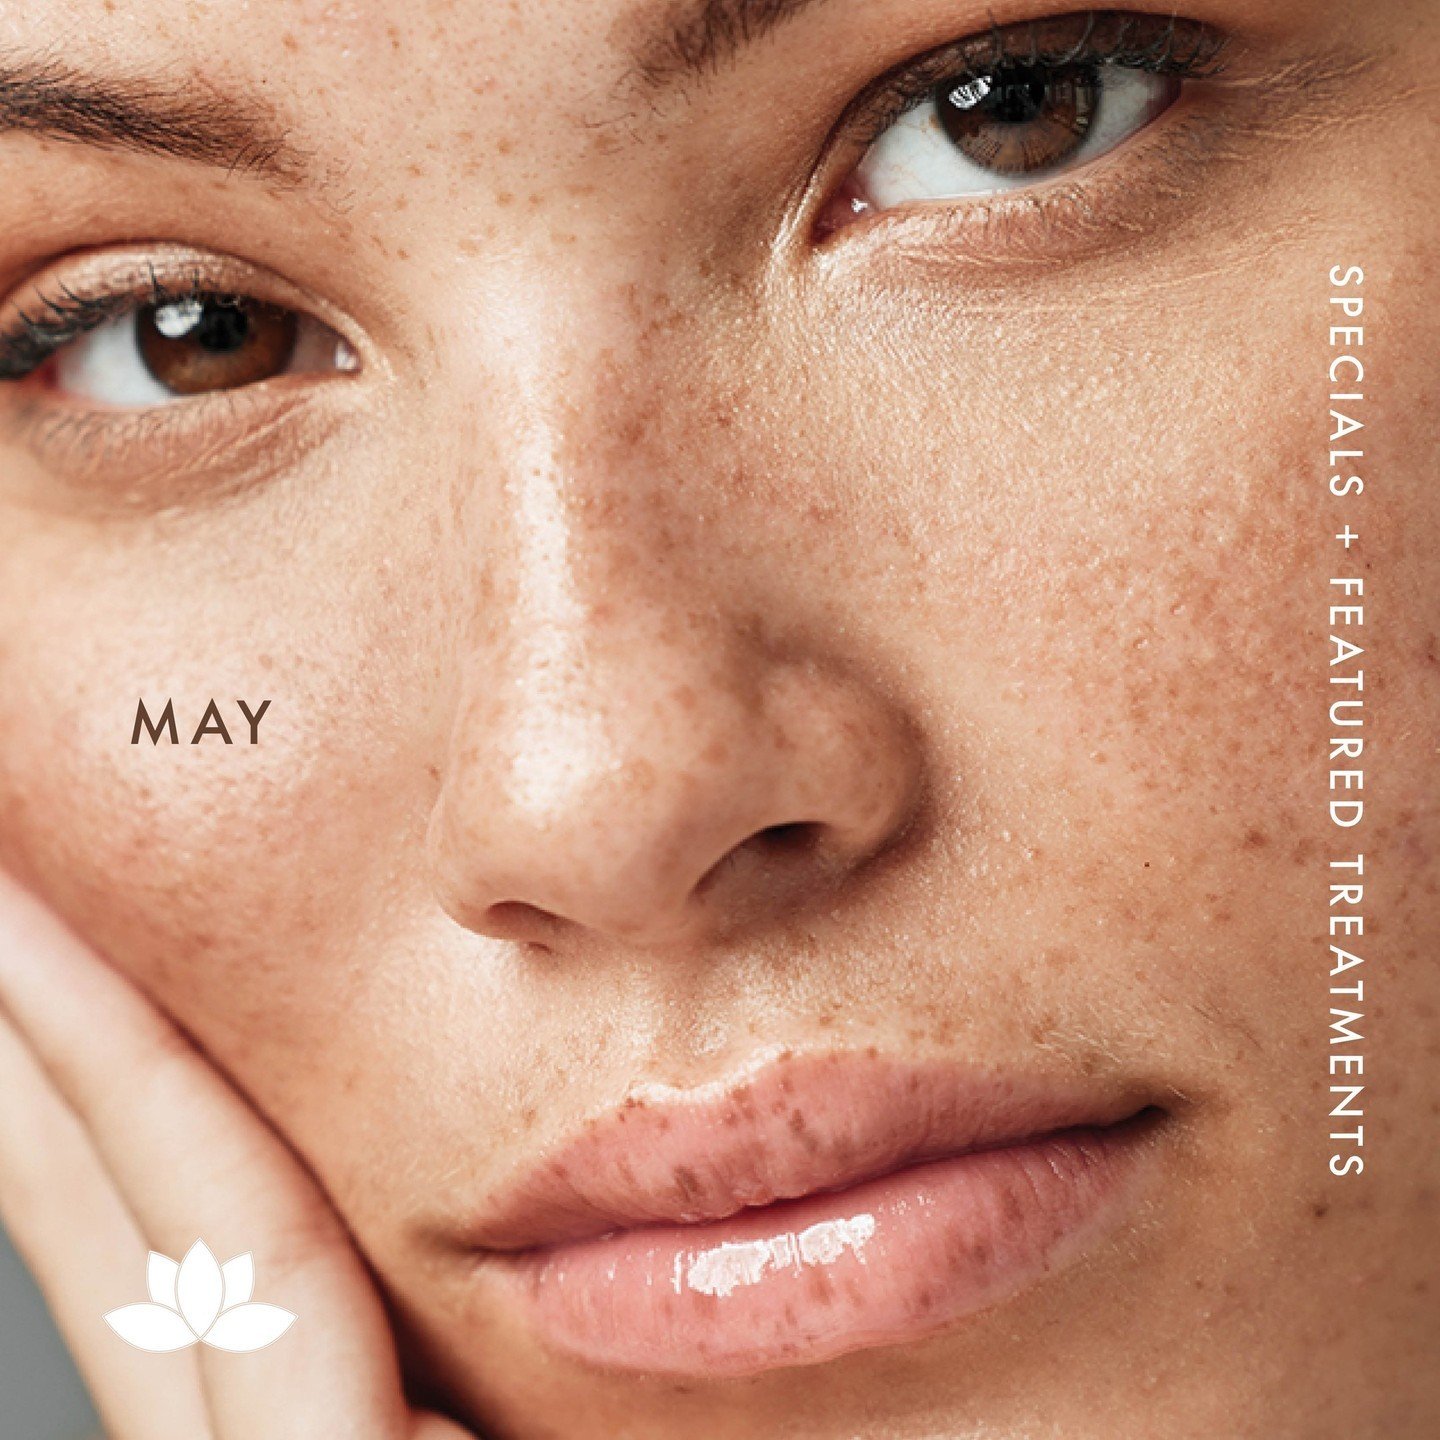 May is here! Swipe to take advantage of our amazing $1,000 savings on The Motherload &ndash; our ULTIMATE refresh package.⁠
⁠
🌸 Full Facial Balancing with Fillers addressing the Temples, Cheeks, Jawline and Lips.⁠
⁠
🌸 Biostimulators to Stimulate Co